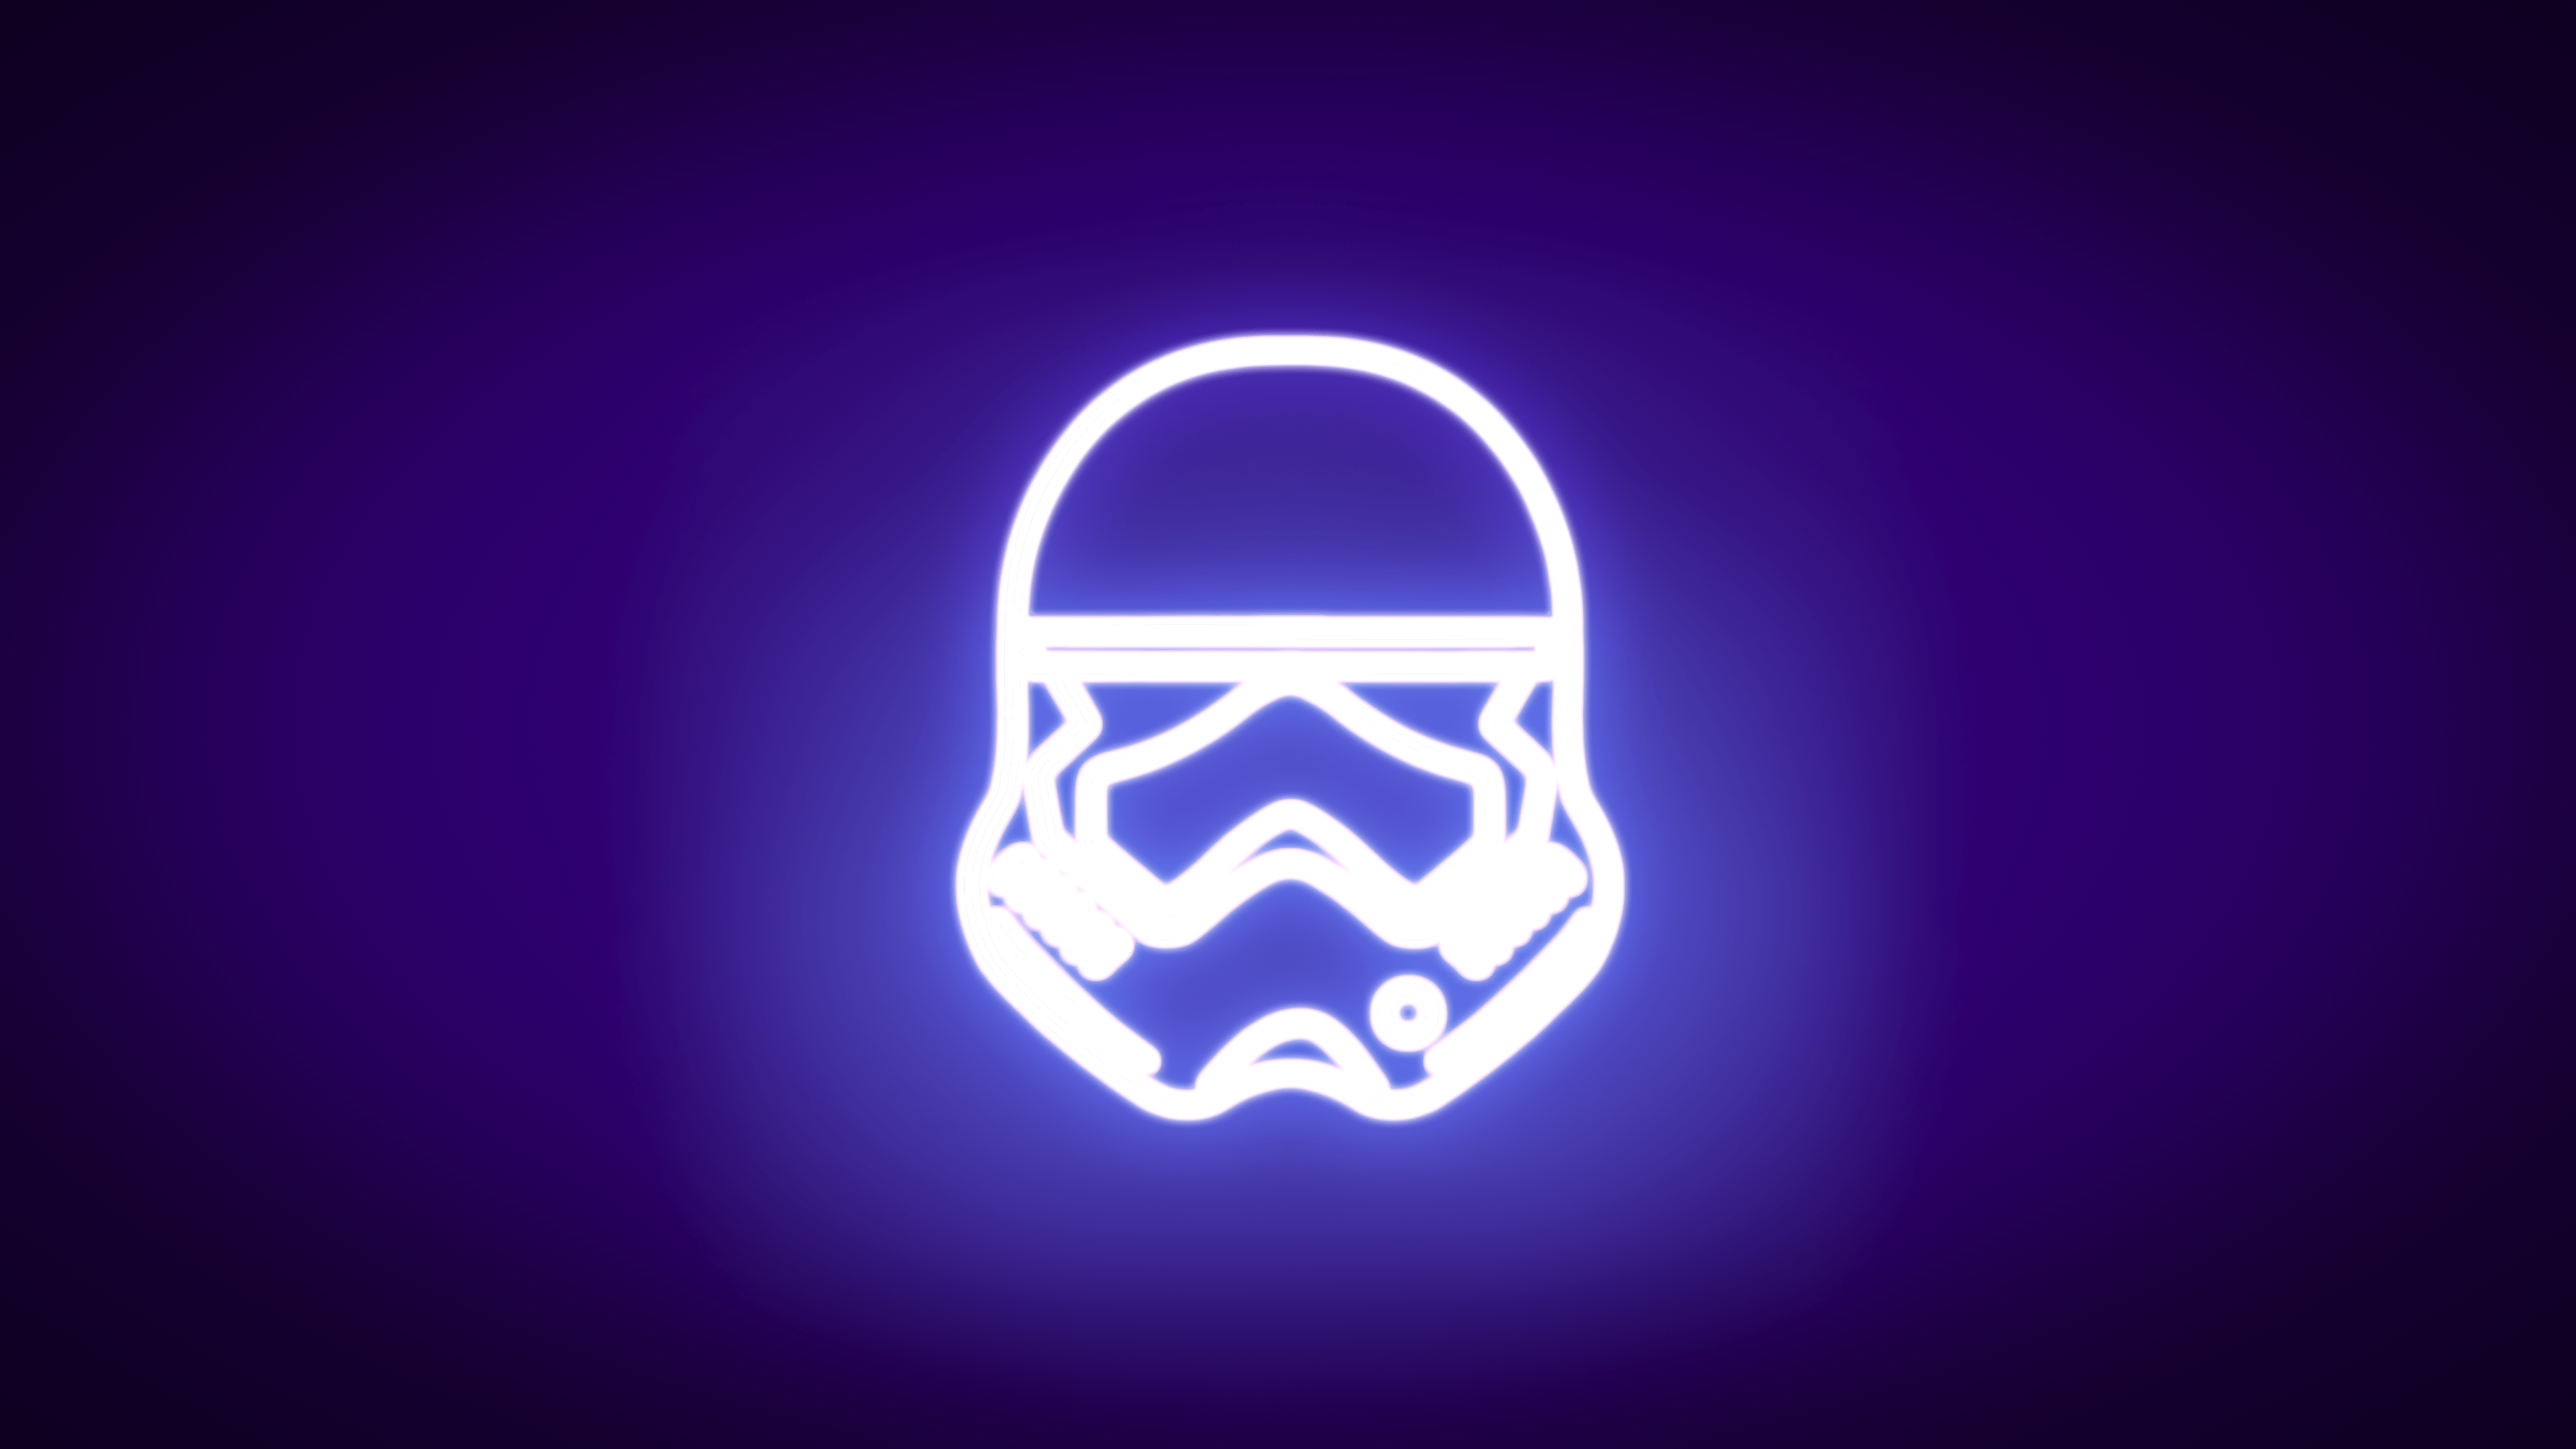 Star Wars Neon Simple Background Minimalism Stormtrooper Imperial Forces Imperial Stormtrooper Helme Wallpaper:3840x2160